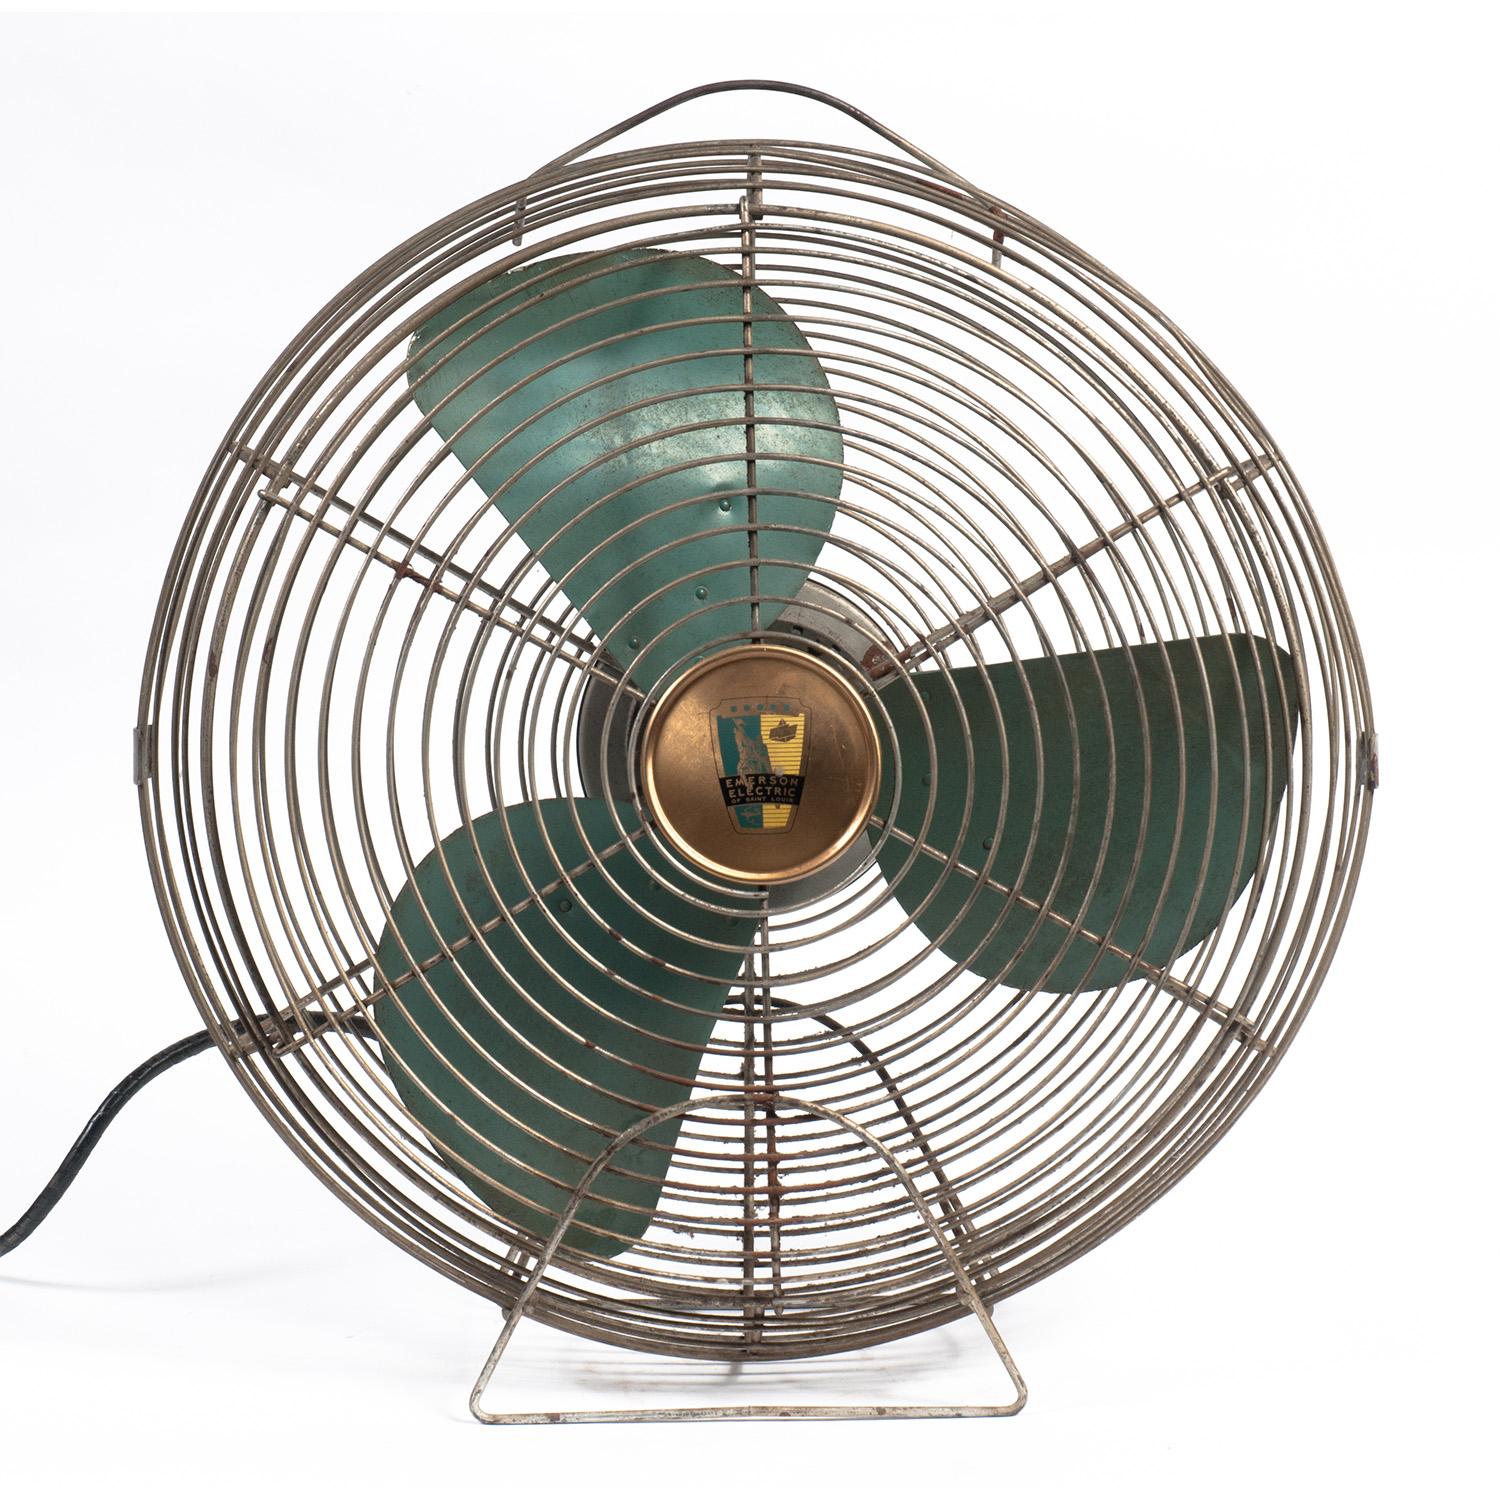 Large vintage fan with with turquoise blades and manufacturer medallions on front and back reading 